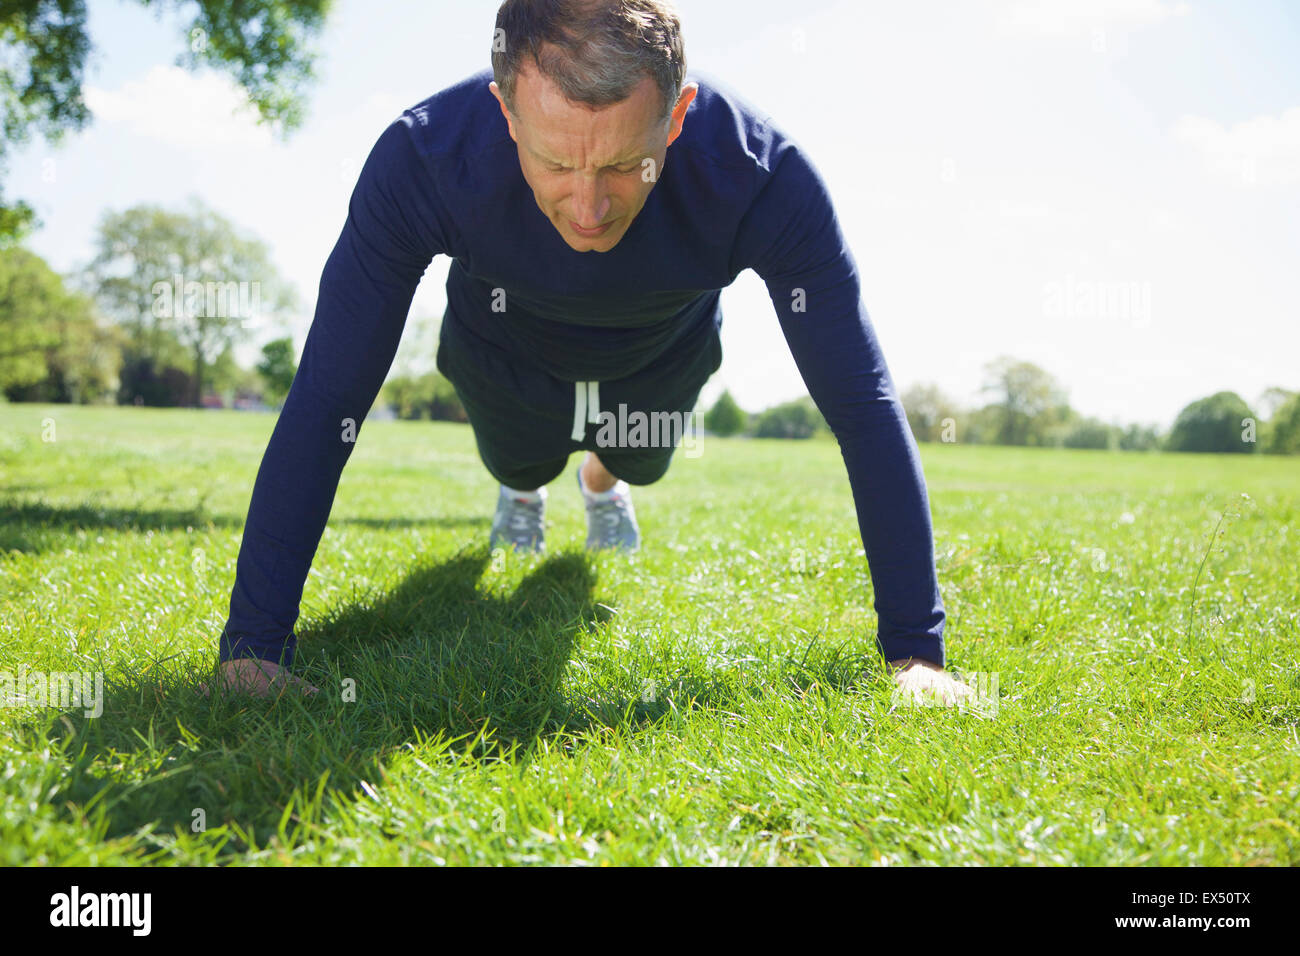 Mature Man doing Pushups in the Park Stock Photo